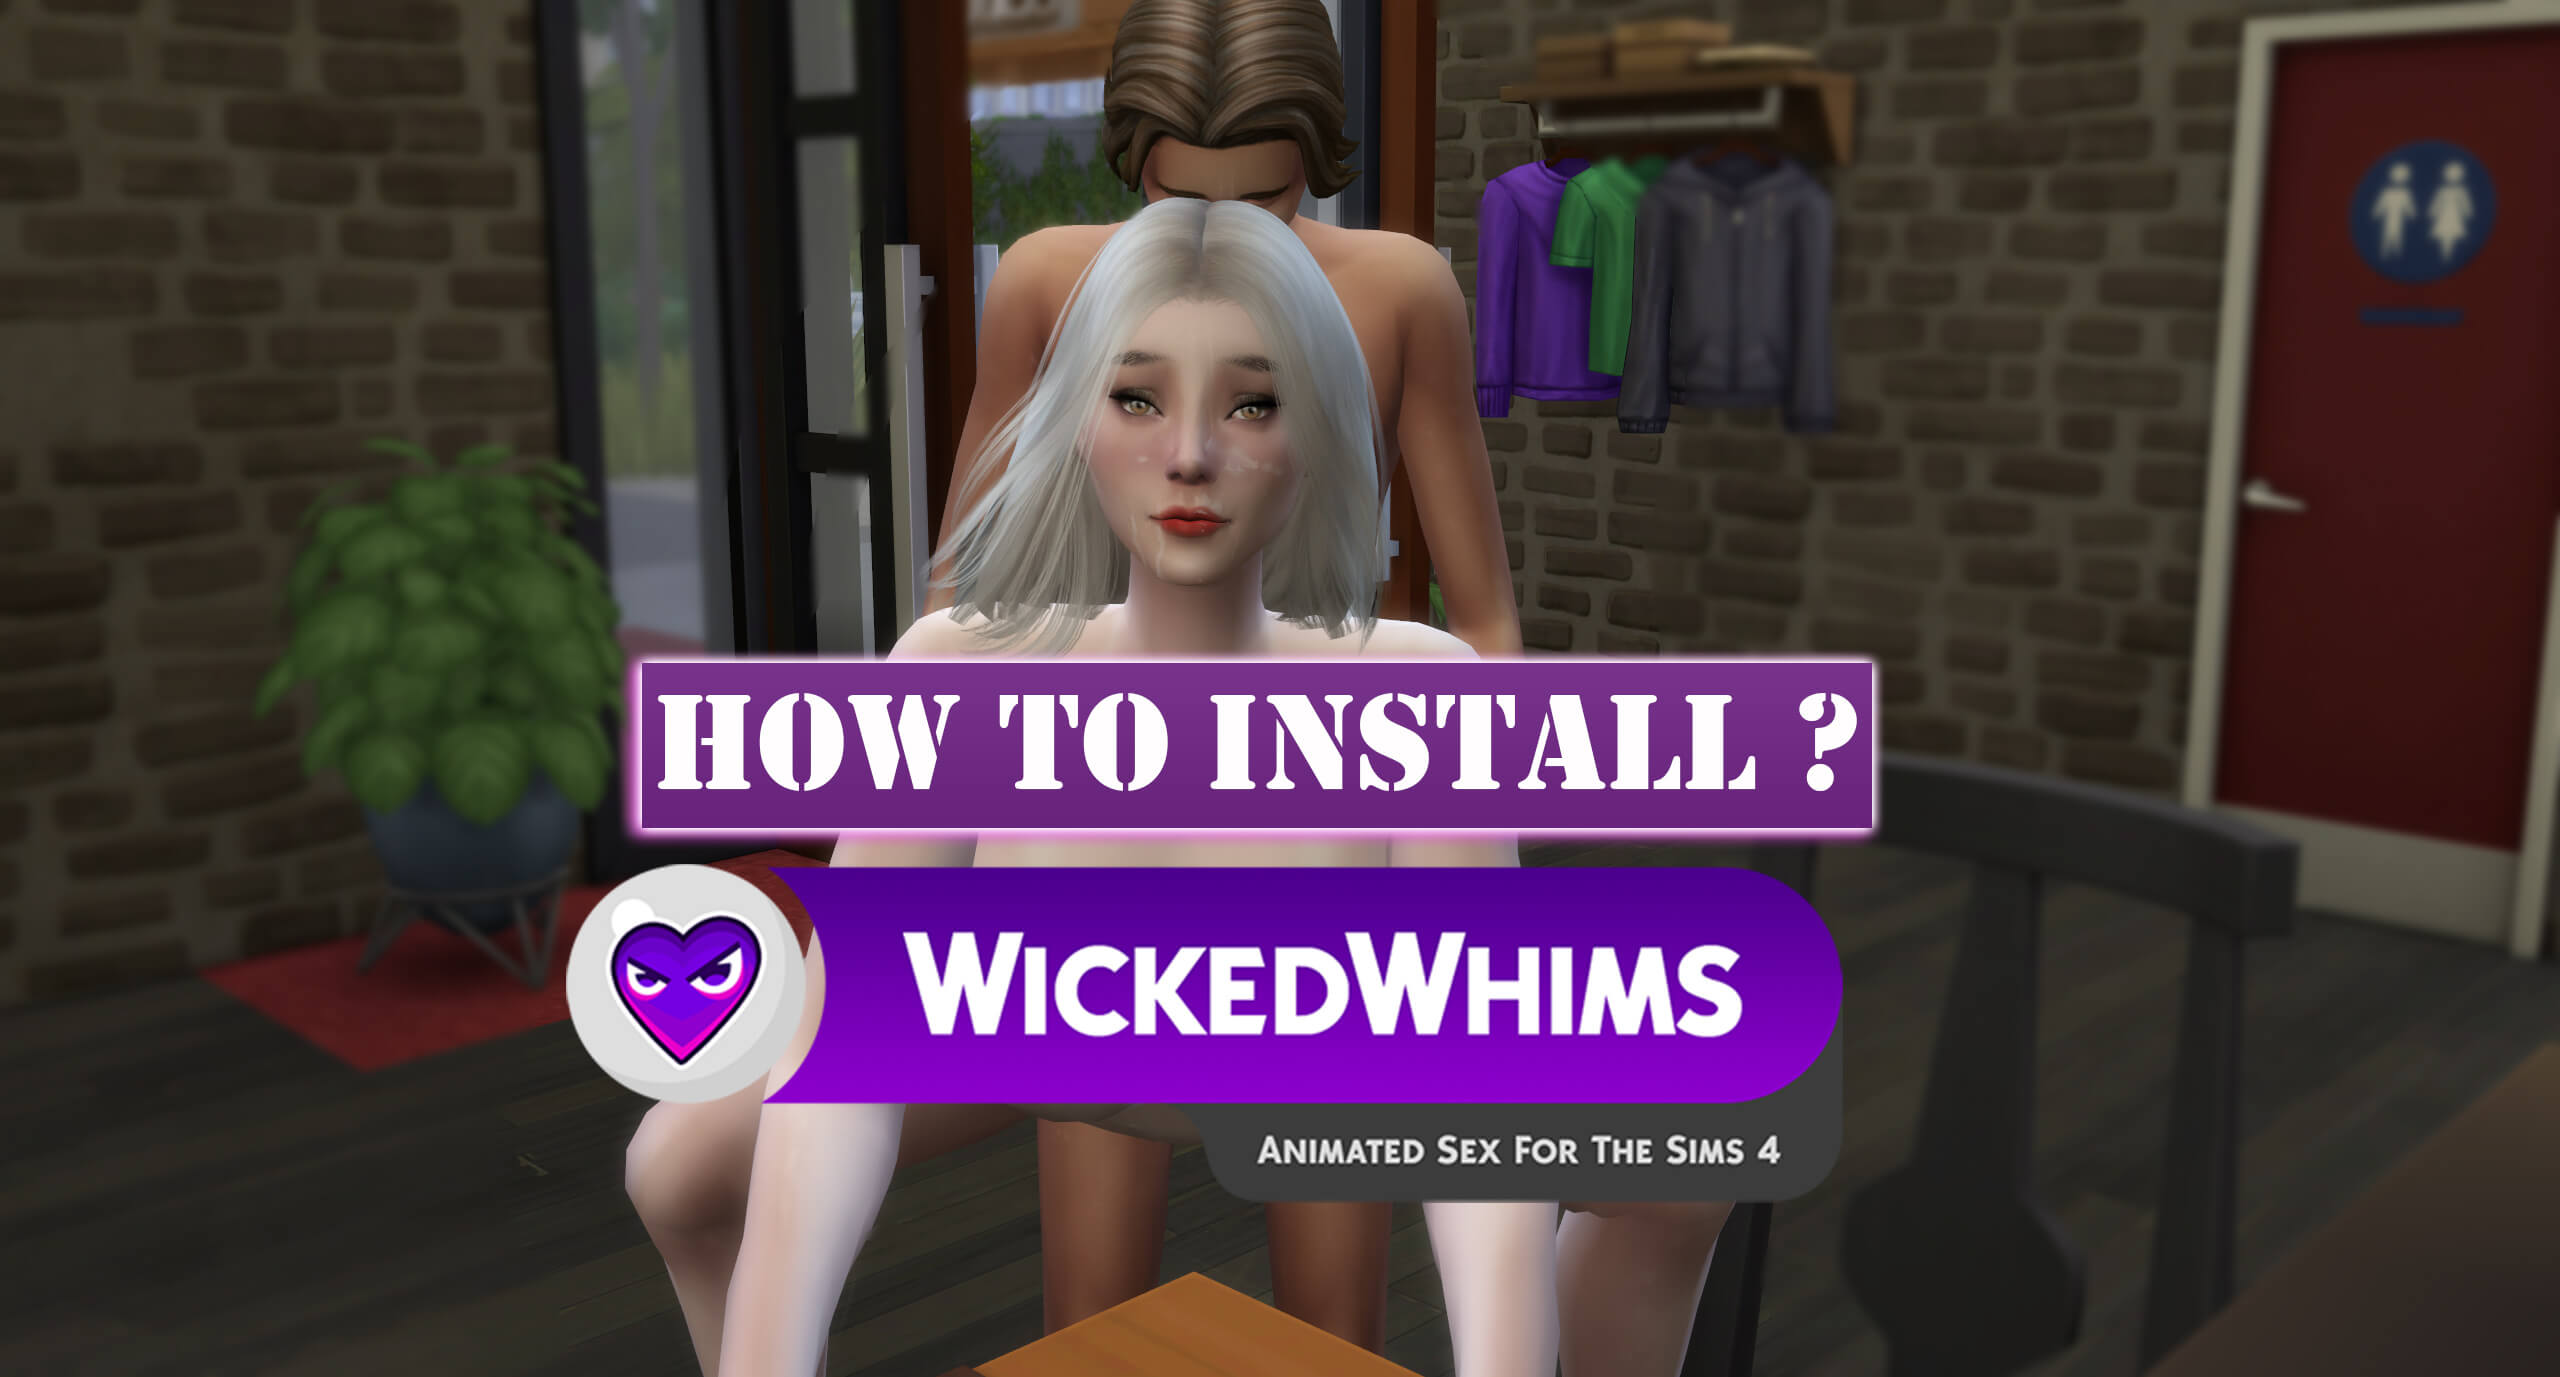 4 mod animations Sims 4 wickedwhims patreon version v167 (06.07.2021) sims ...